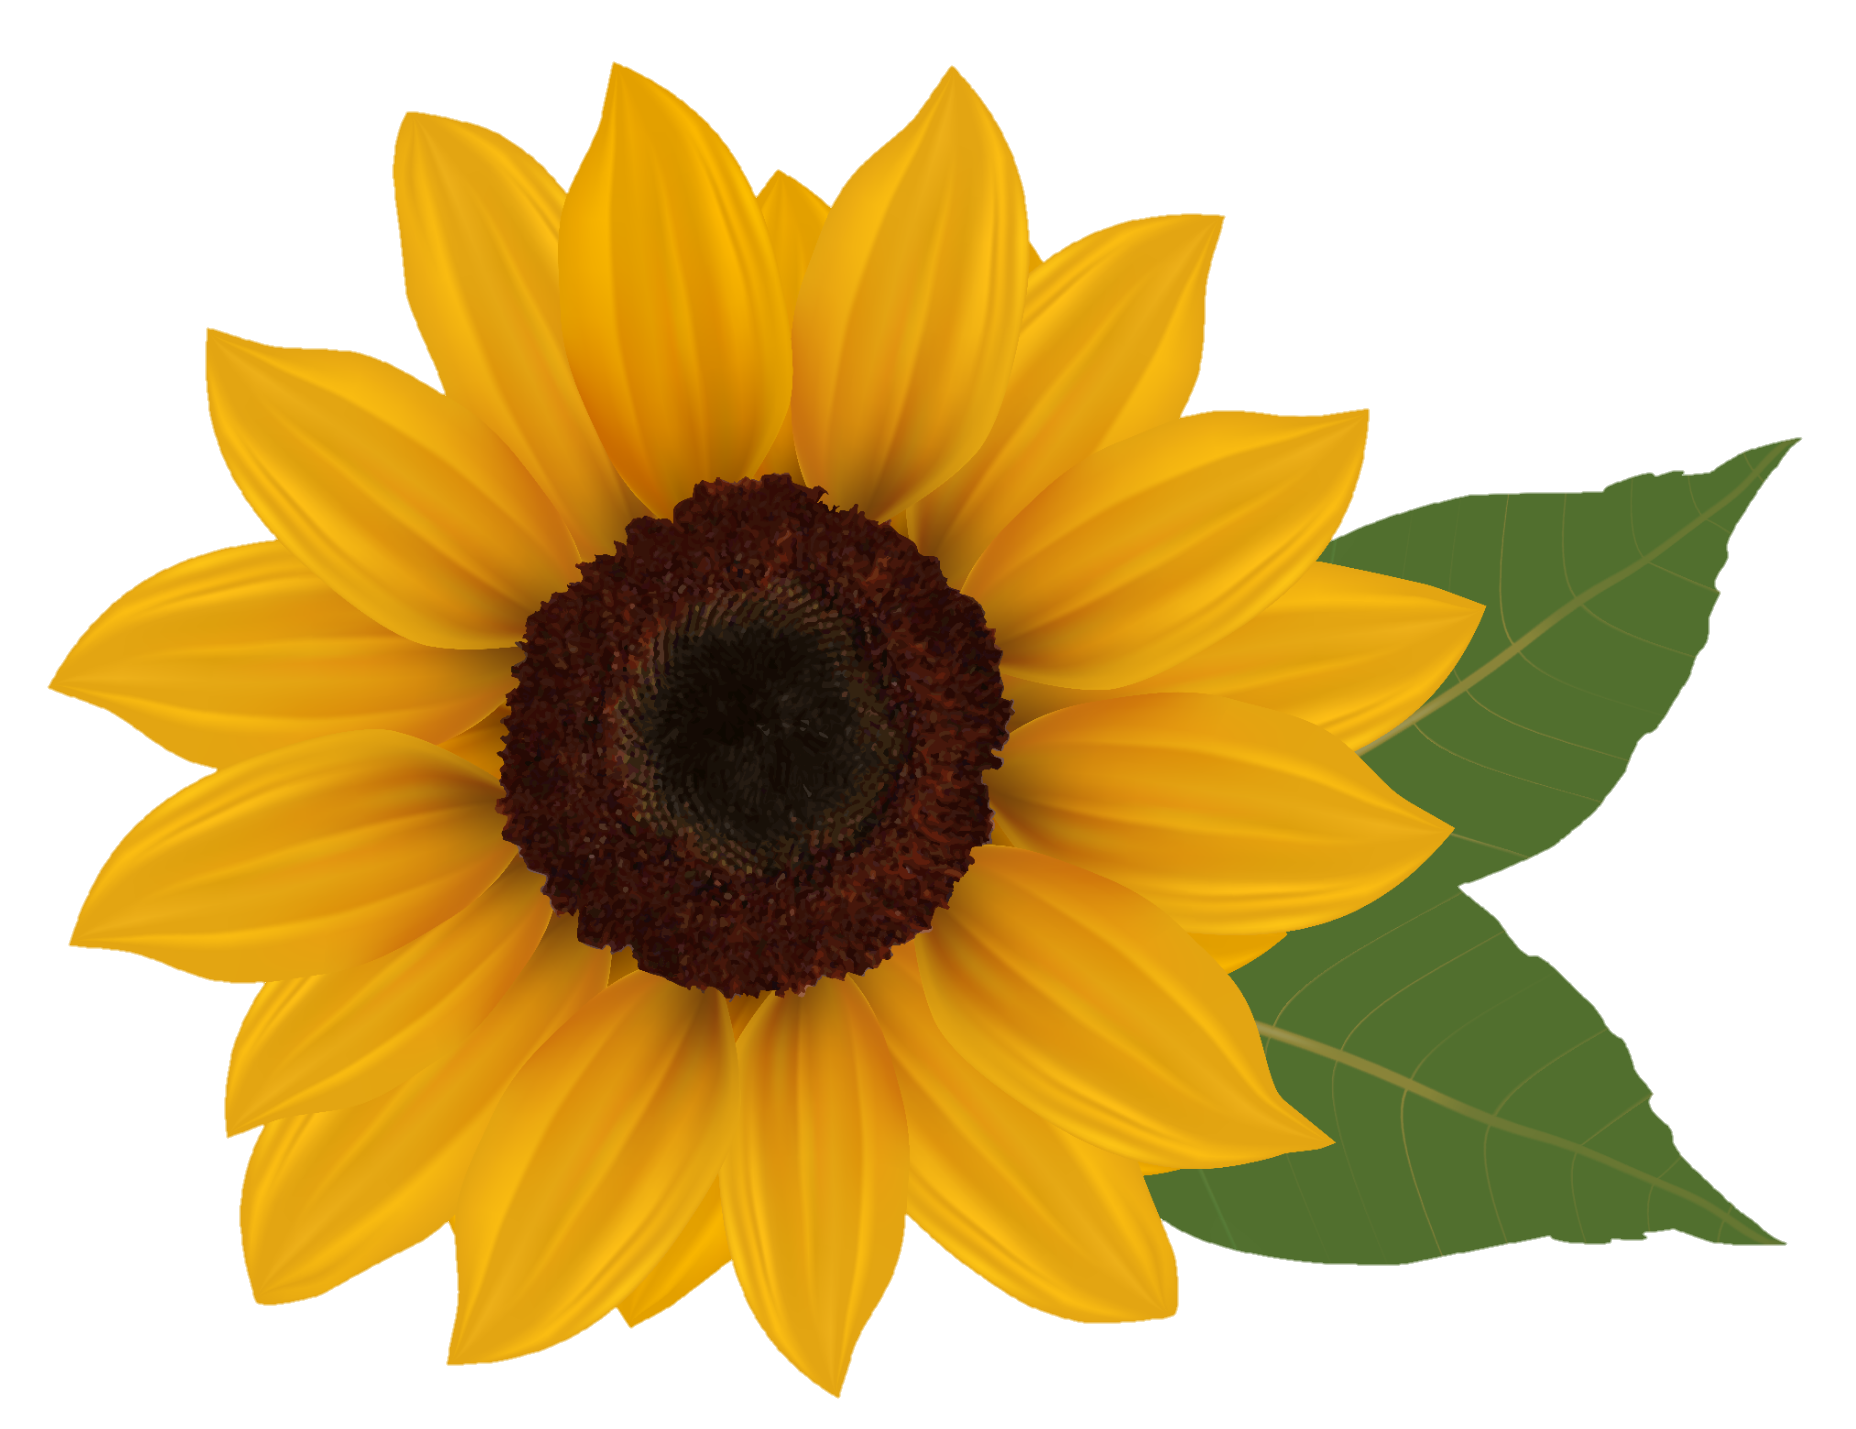 sunflower-png-image-from-pngfre-5-1